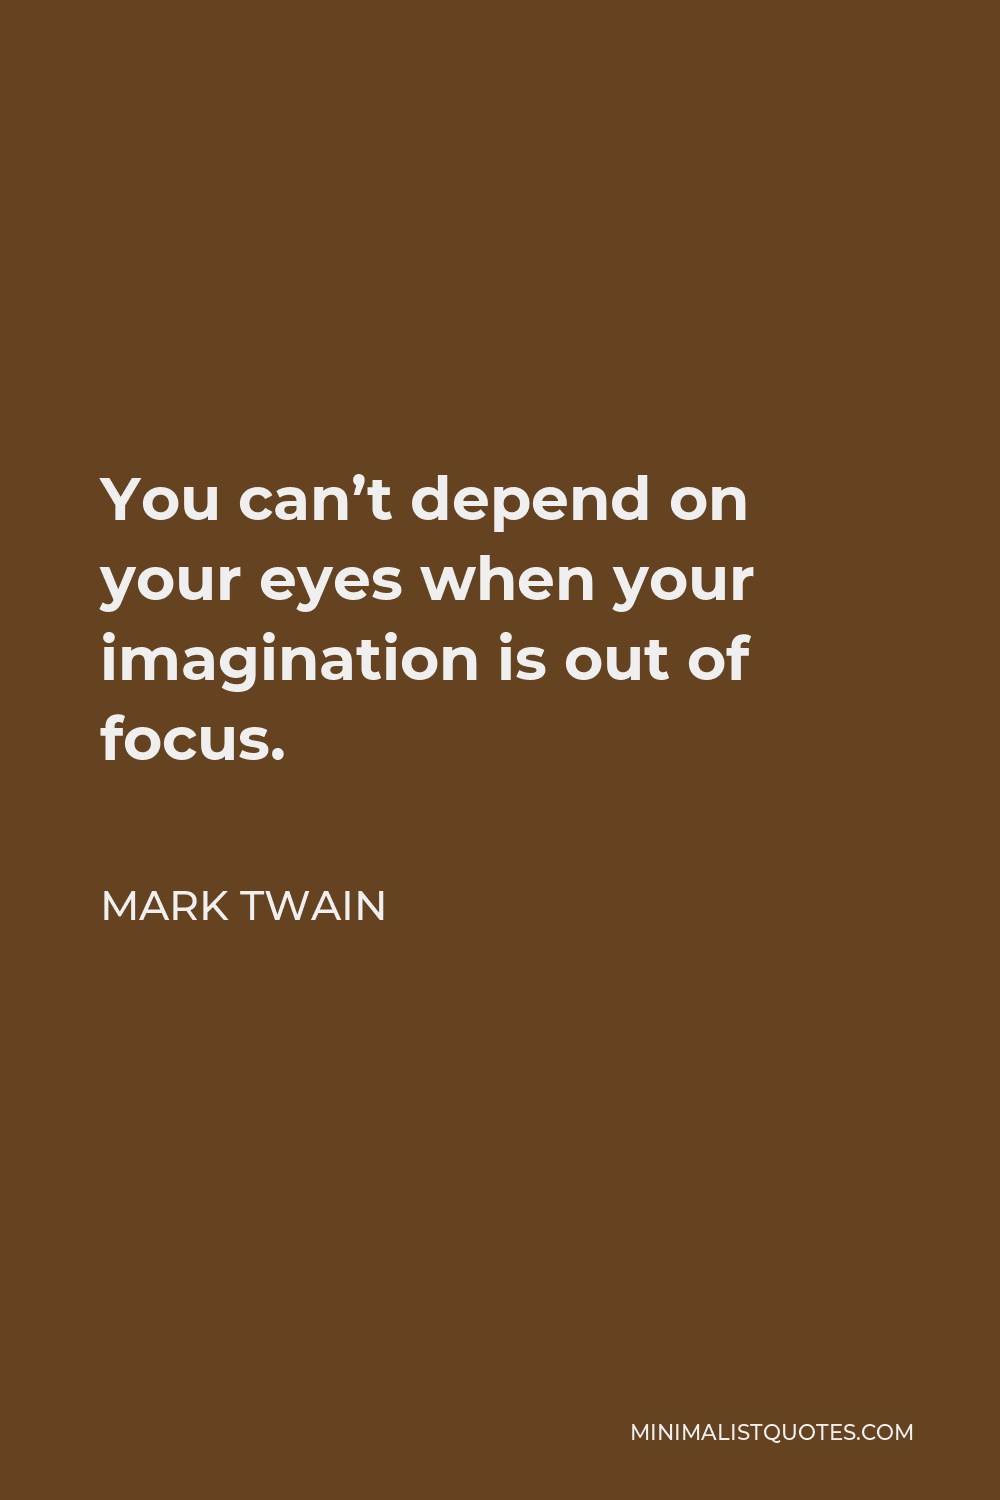 Mark Twain Quote - You can’t depend on your eyes when your imagination is out of focus.